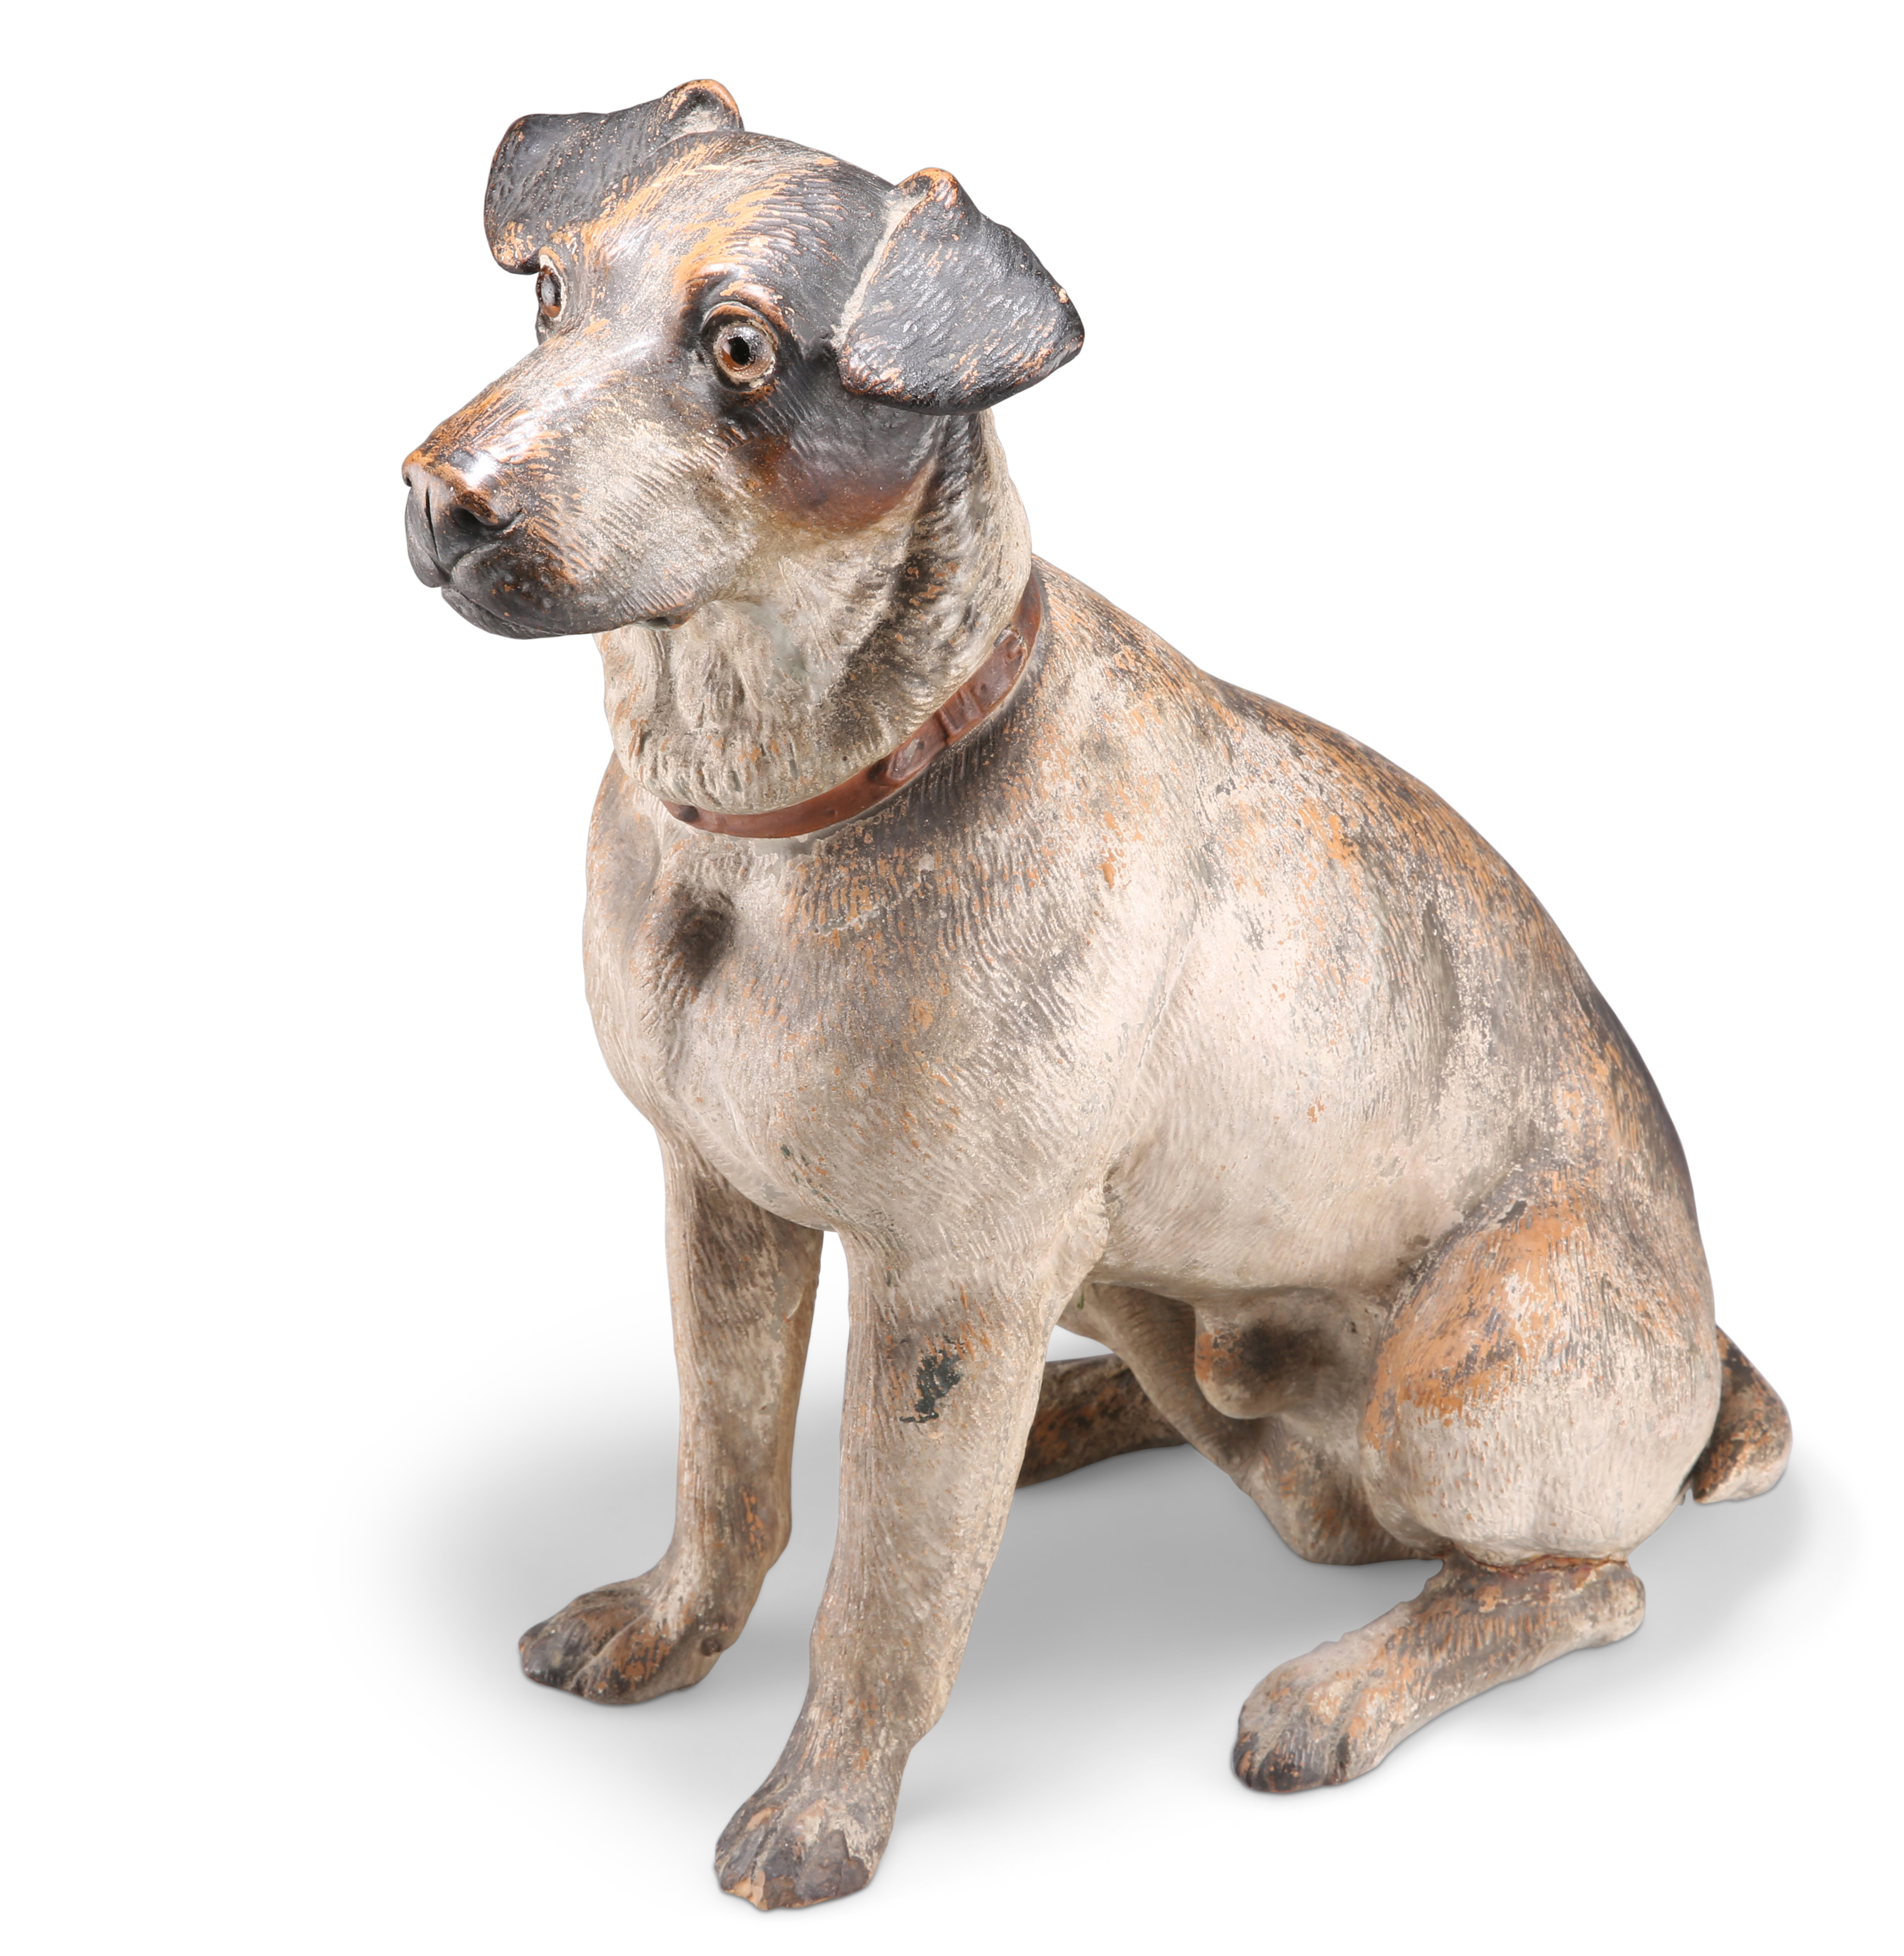 AN AUSTRIAN COLD-PAINTED TERRACOTTA MODEL OF A JACK RUSSELL